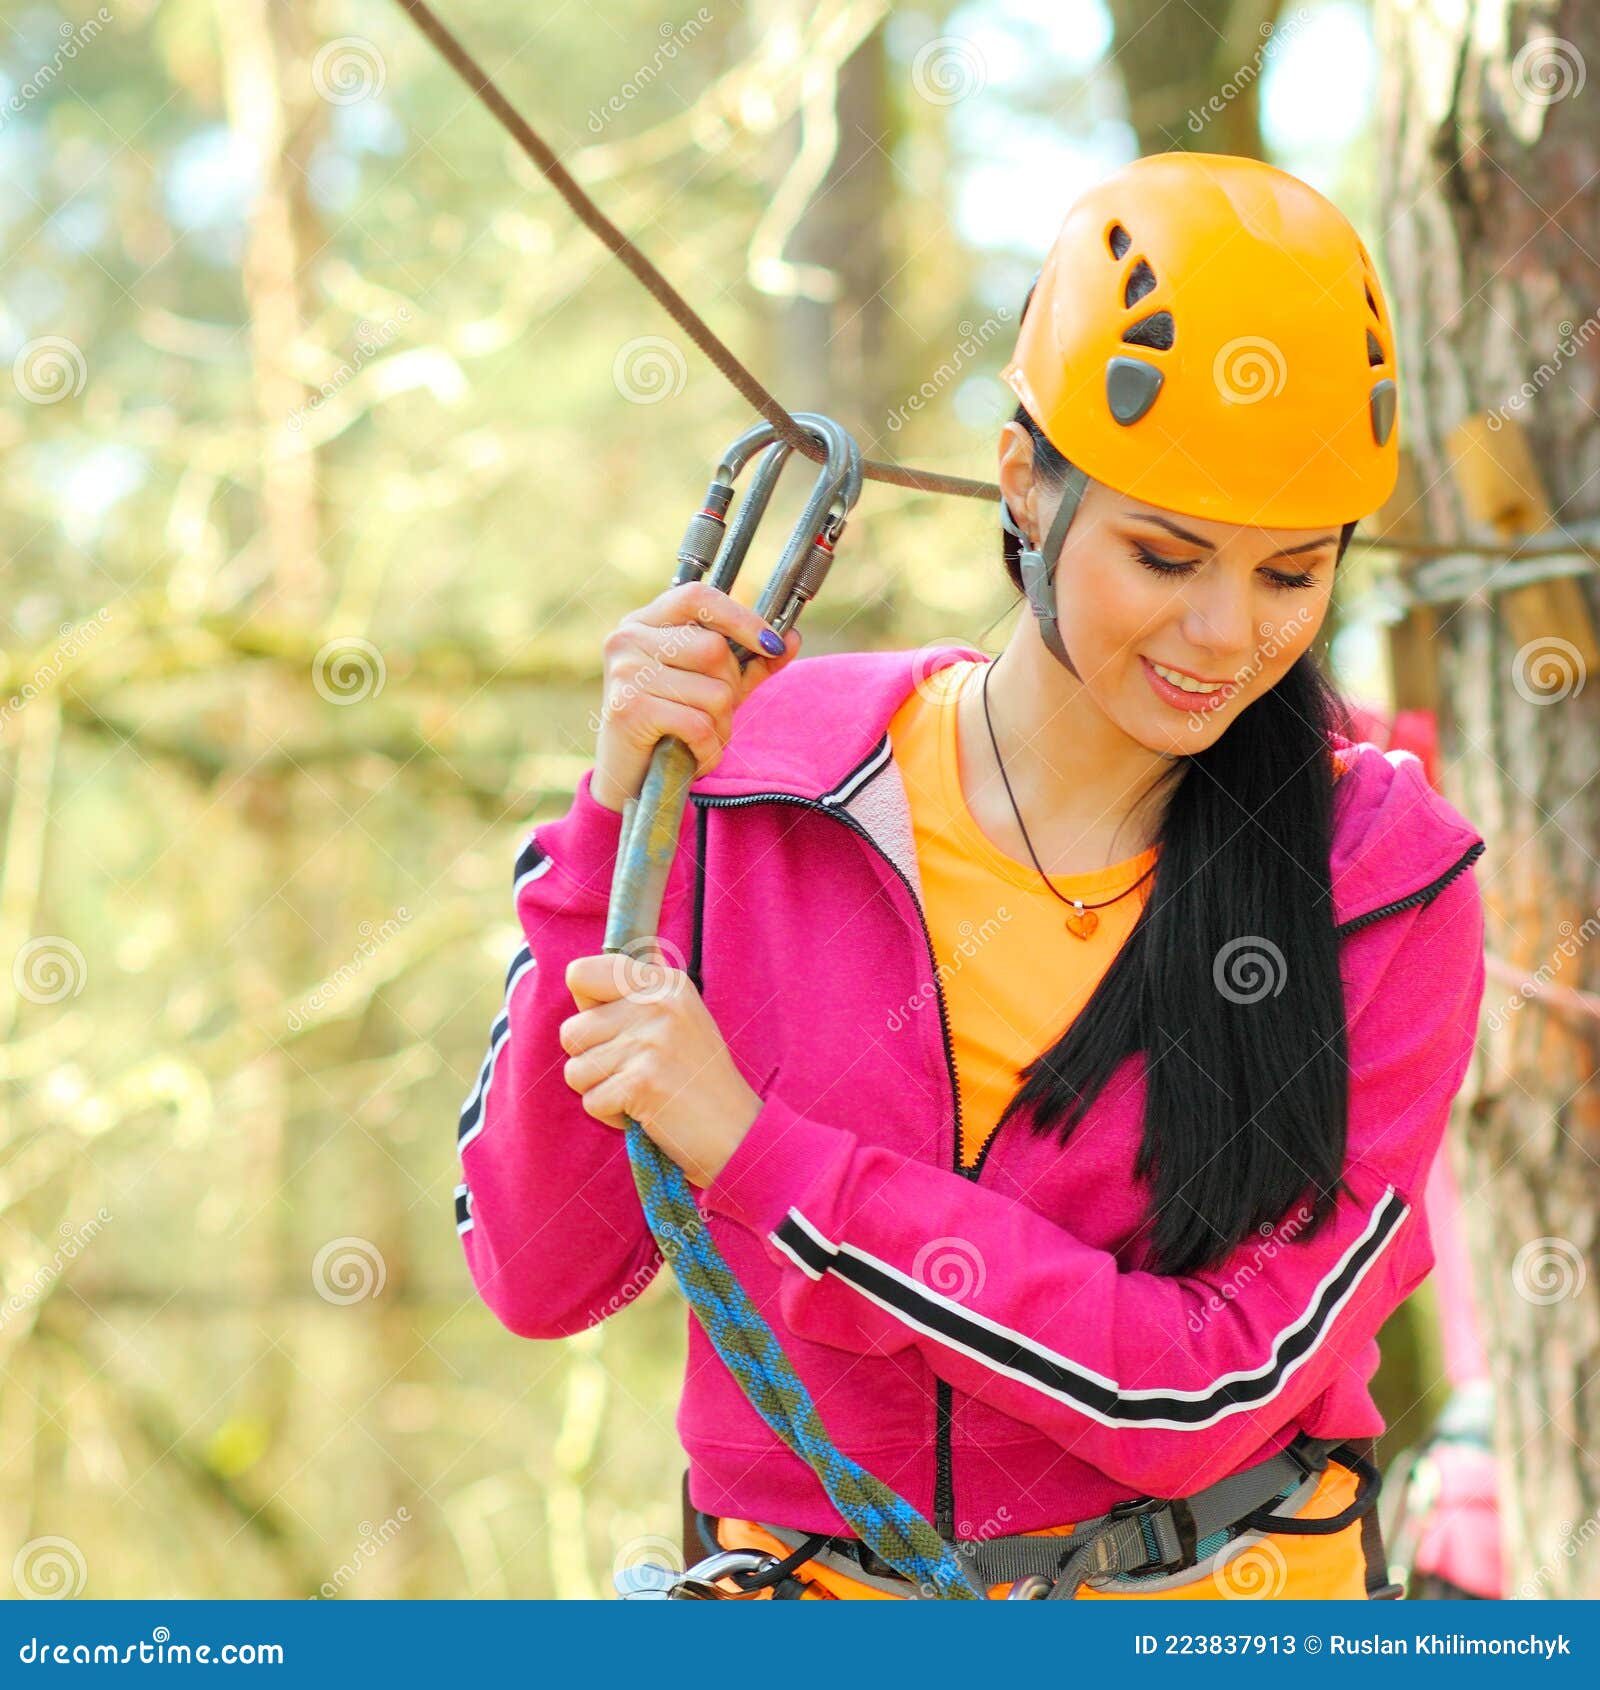 Cheerful Attractive Girl in a Special Outfit Engaged in Rock Climbing.  Stock Image - Image of leisure, active: 223837913